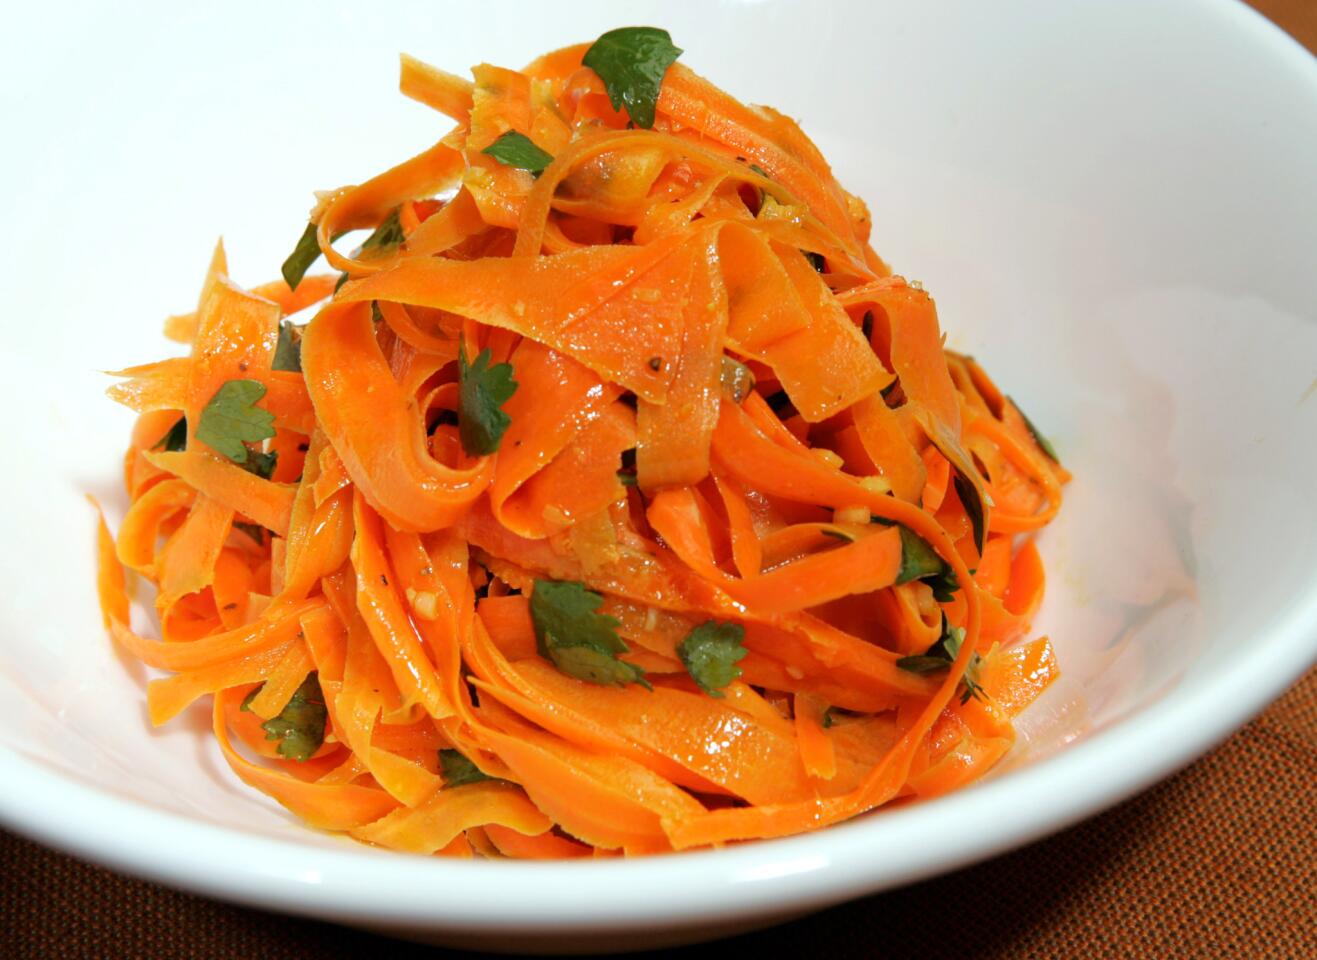 Carrot-cilantro salad with ginger dressing